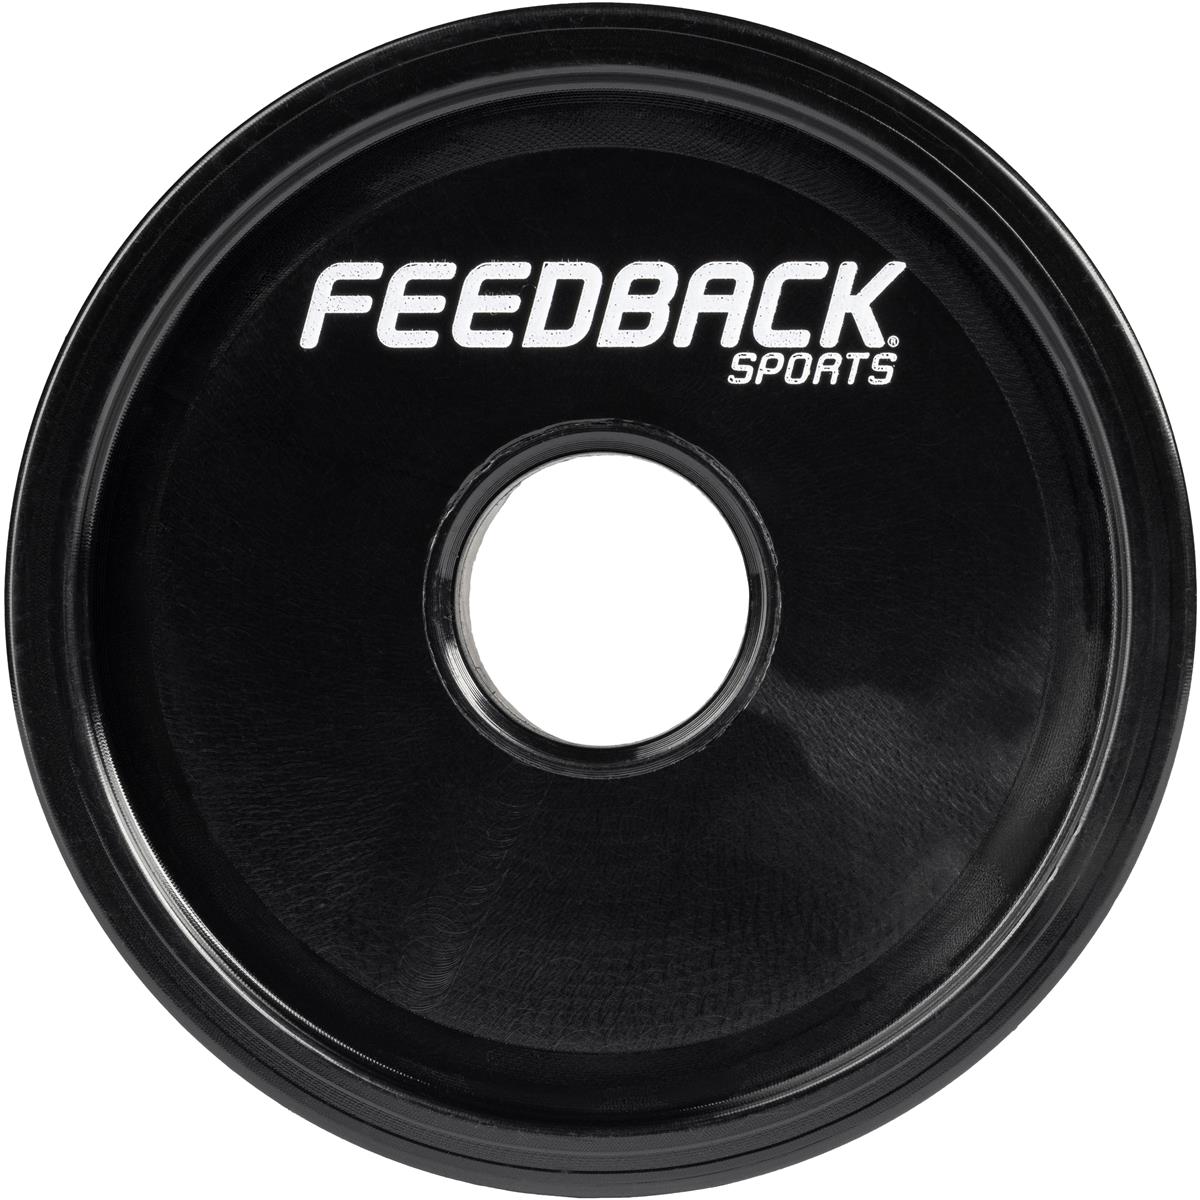 Feedback Sports Chain Keeper  Or repairs and transport with rear wheel removed